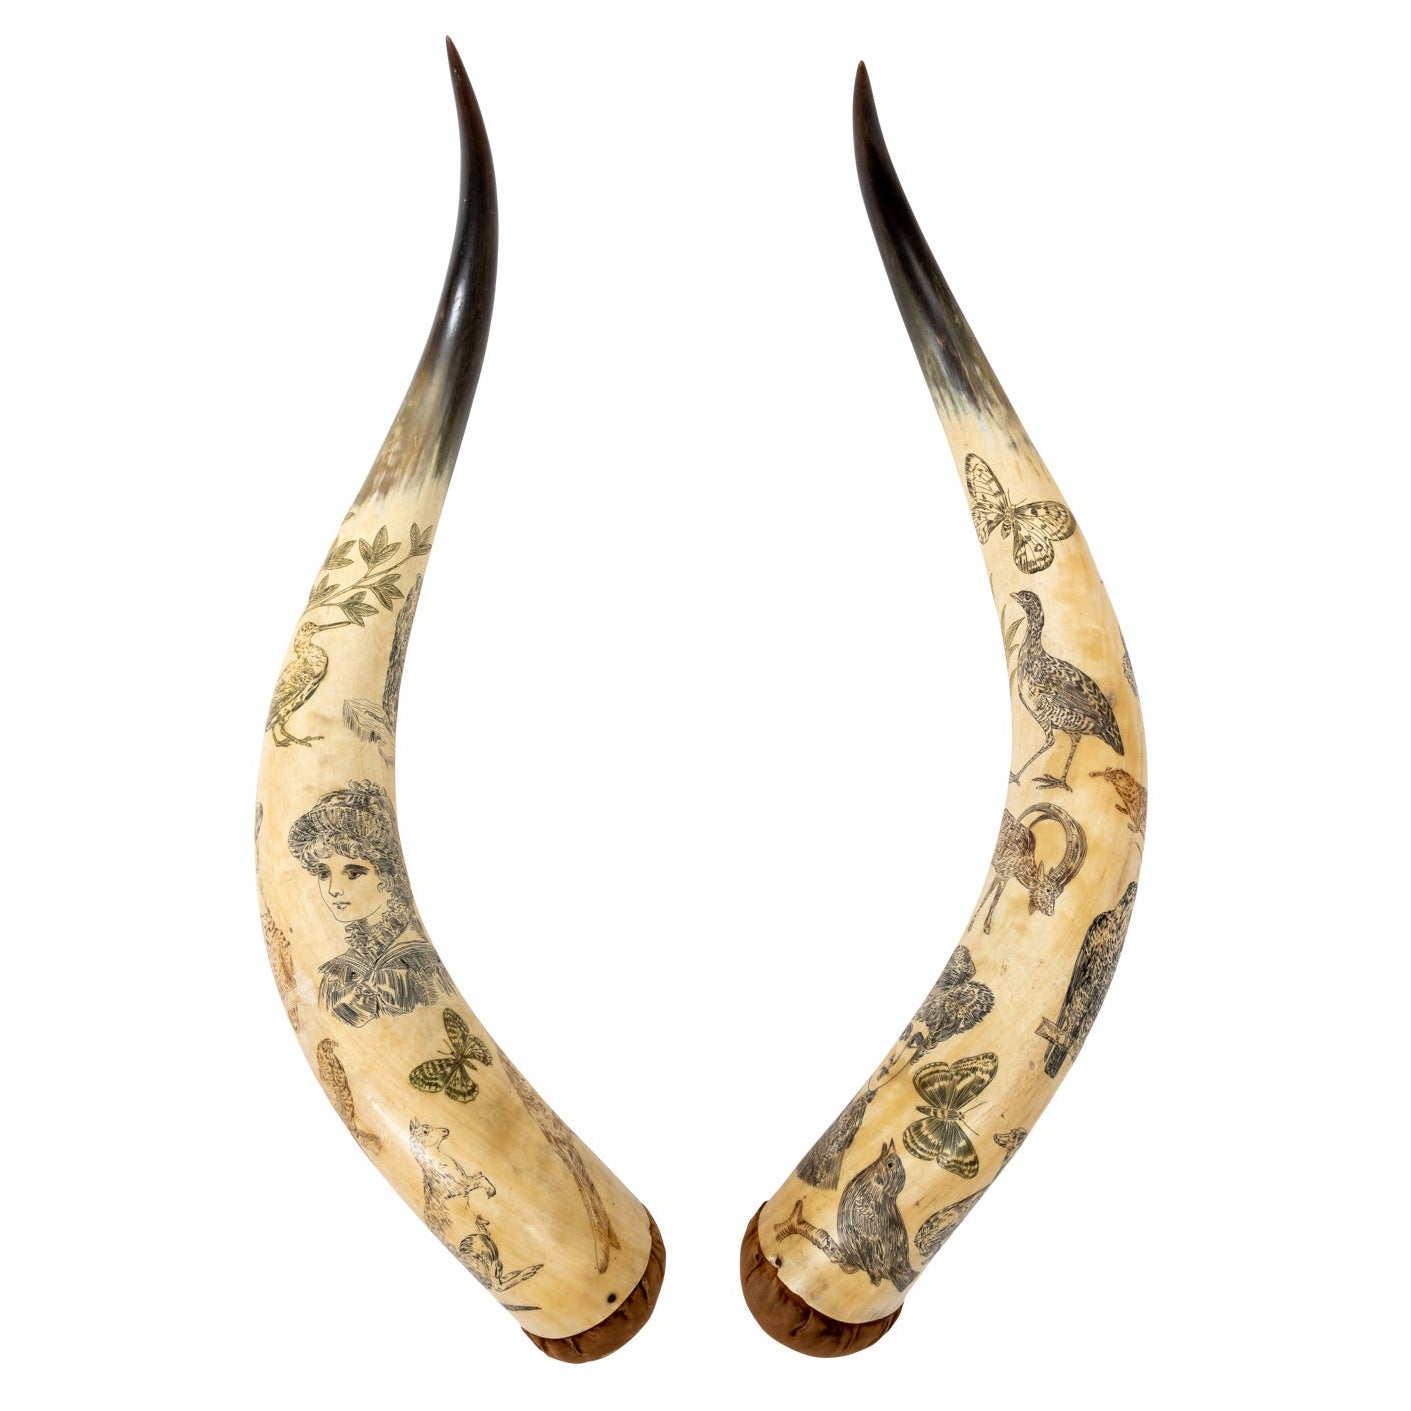 Matched 19th Century Cow Horn Scrimshaw